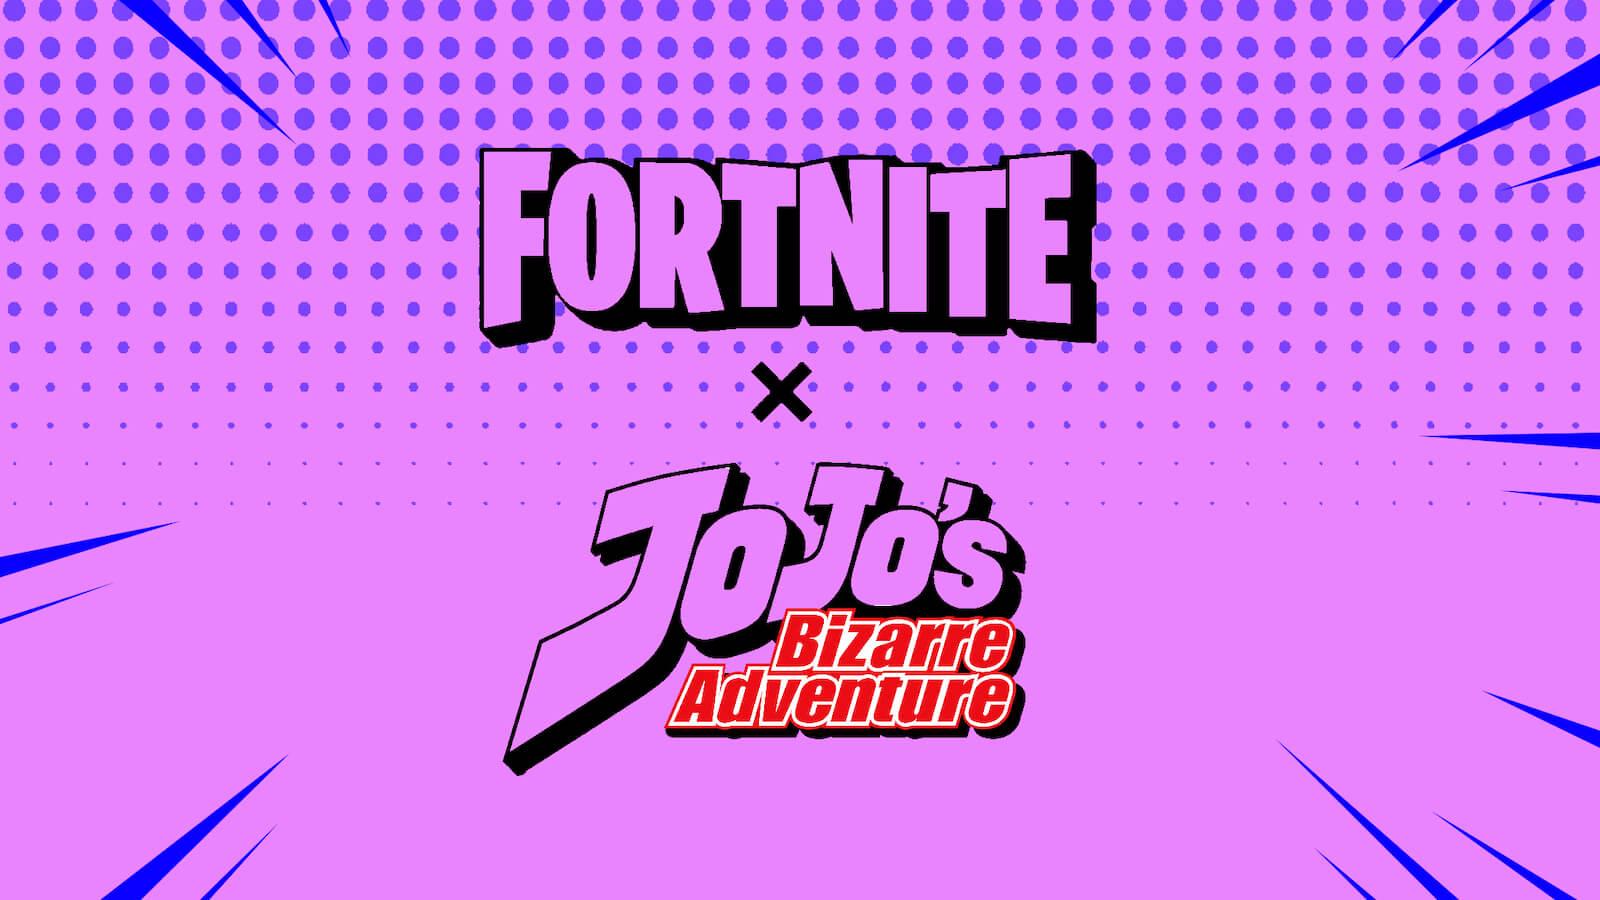 JoJo’s Bizarre Adventure Fortnite concept goes viral as players “desperately” want it